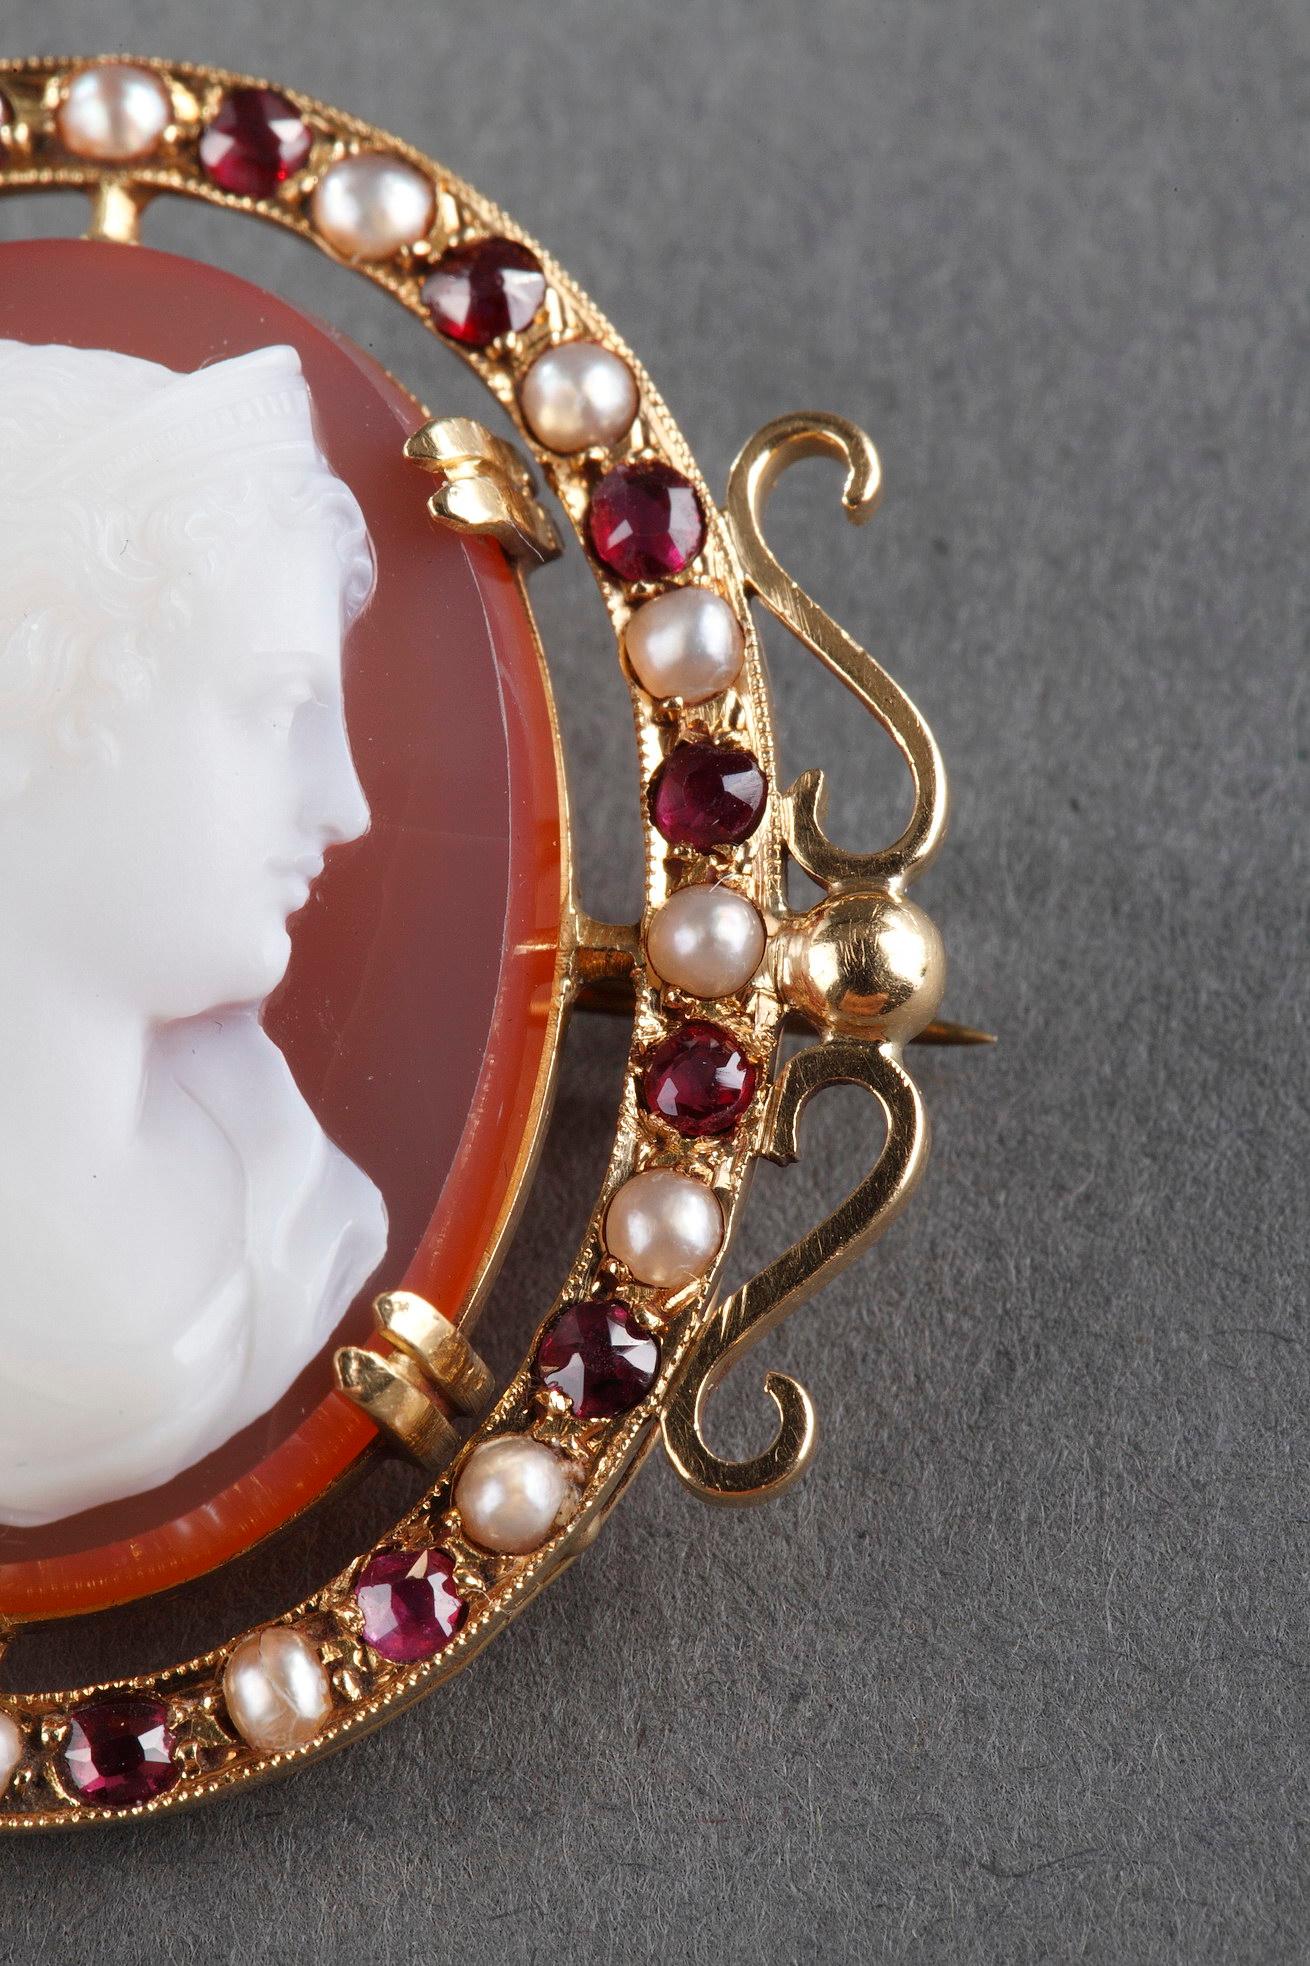 Gold Brooch with Agate Cameo and Pearls, Mid-19th Century For Sale 2